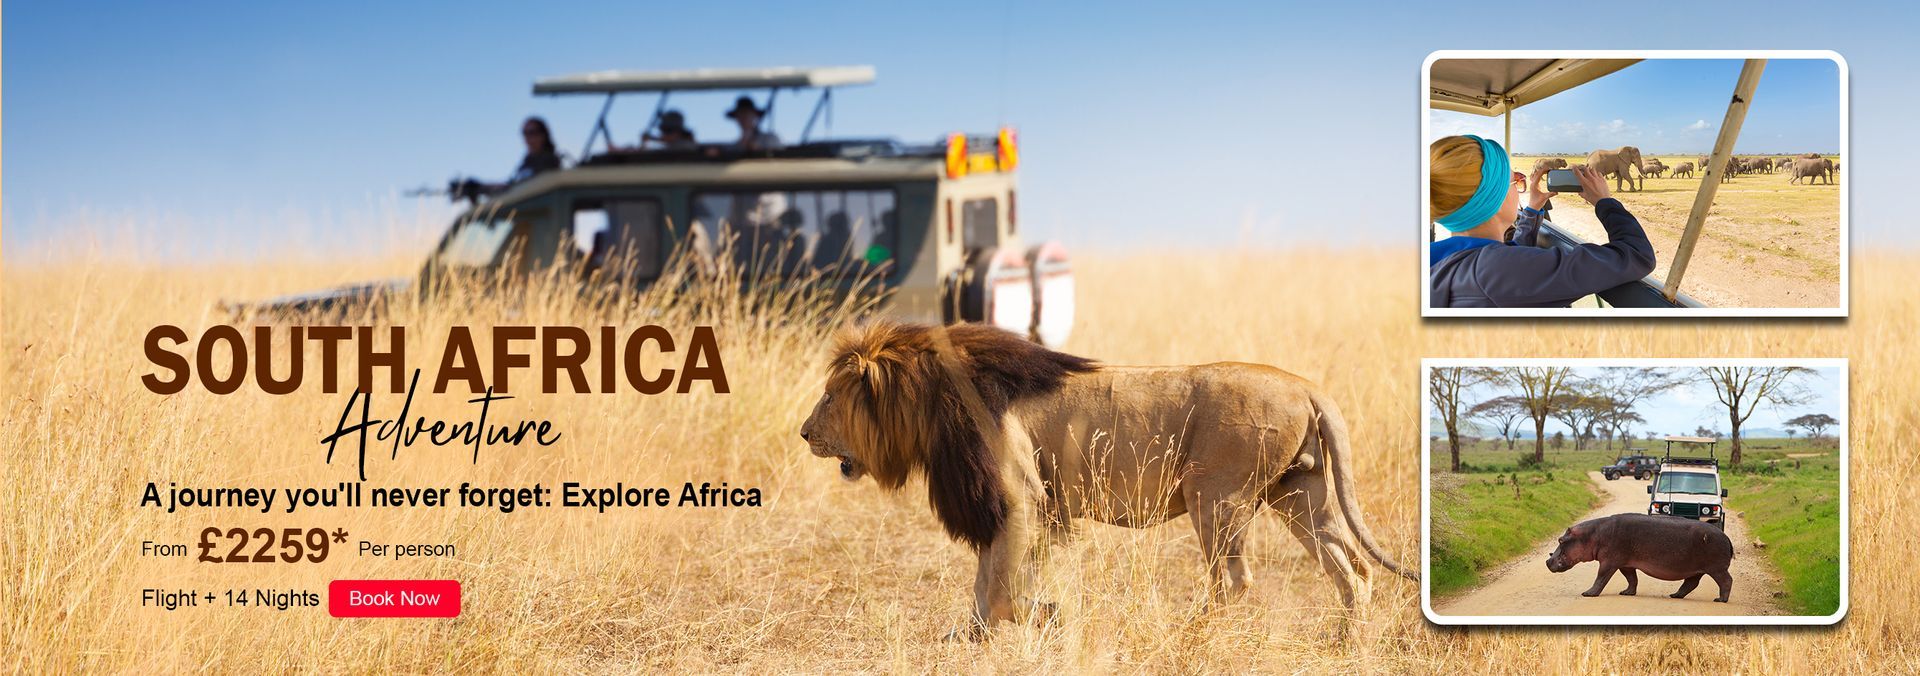 South Africa Adventure Tours